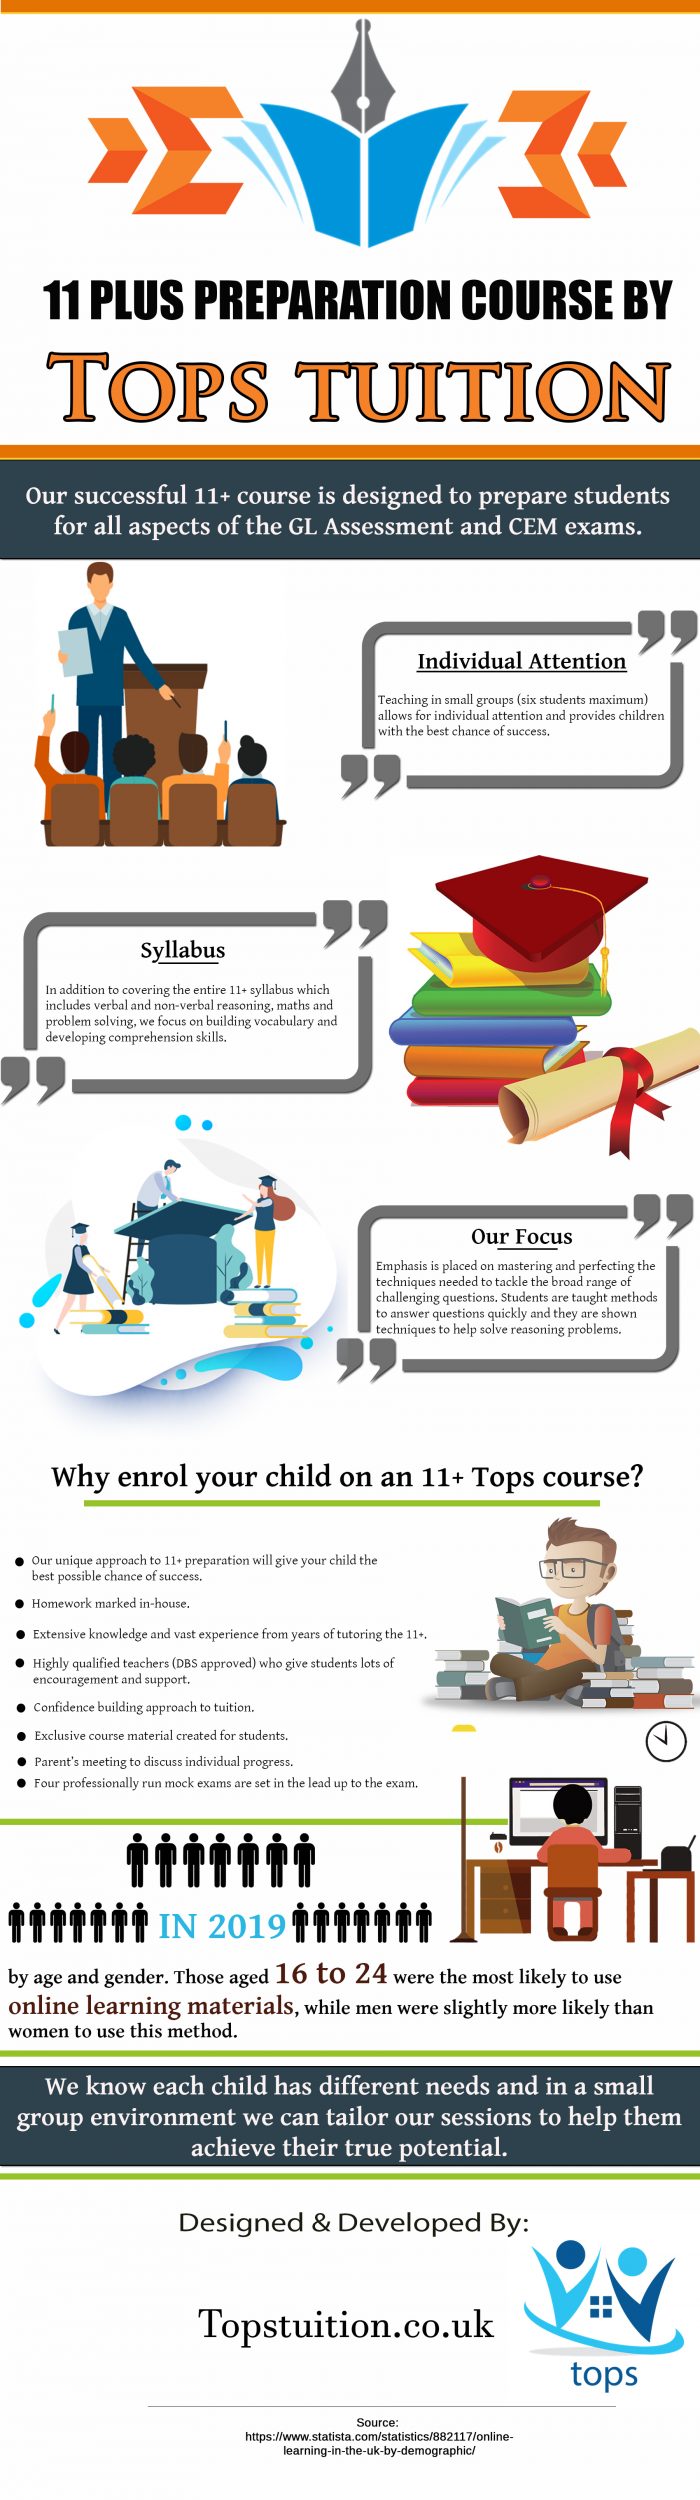 11+ PREPARATION COURSE BY TOPSTUITION